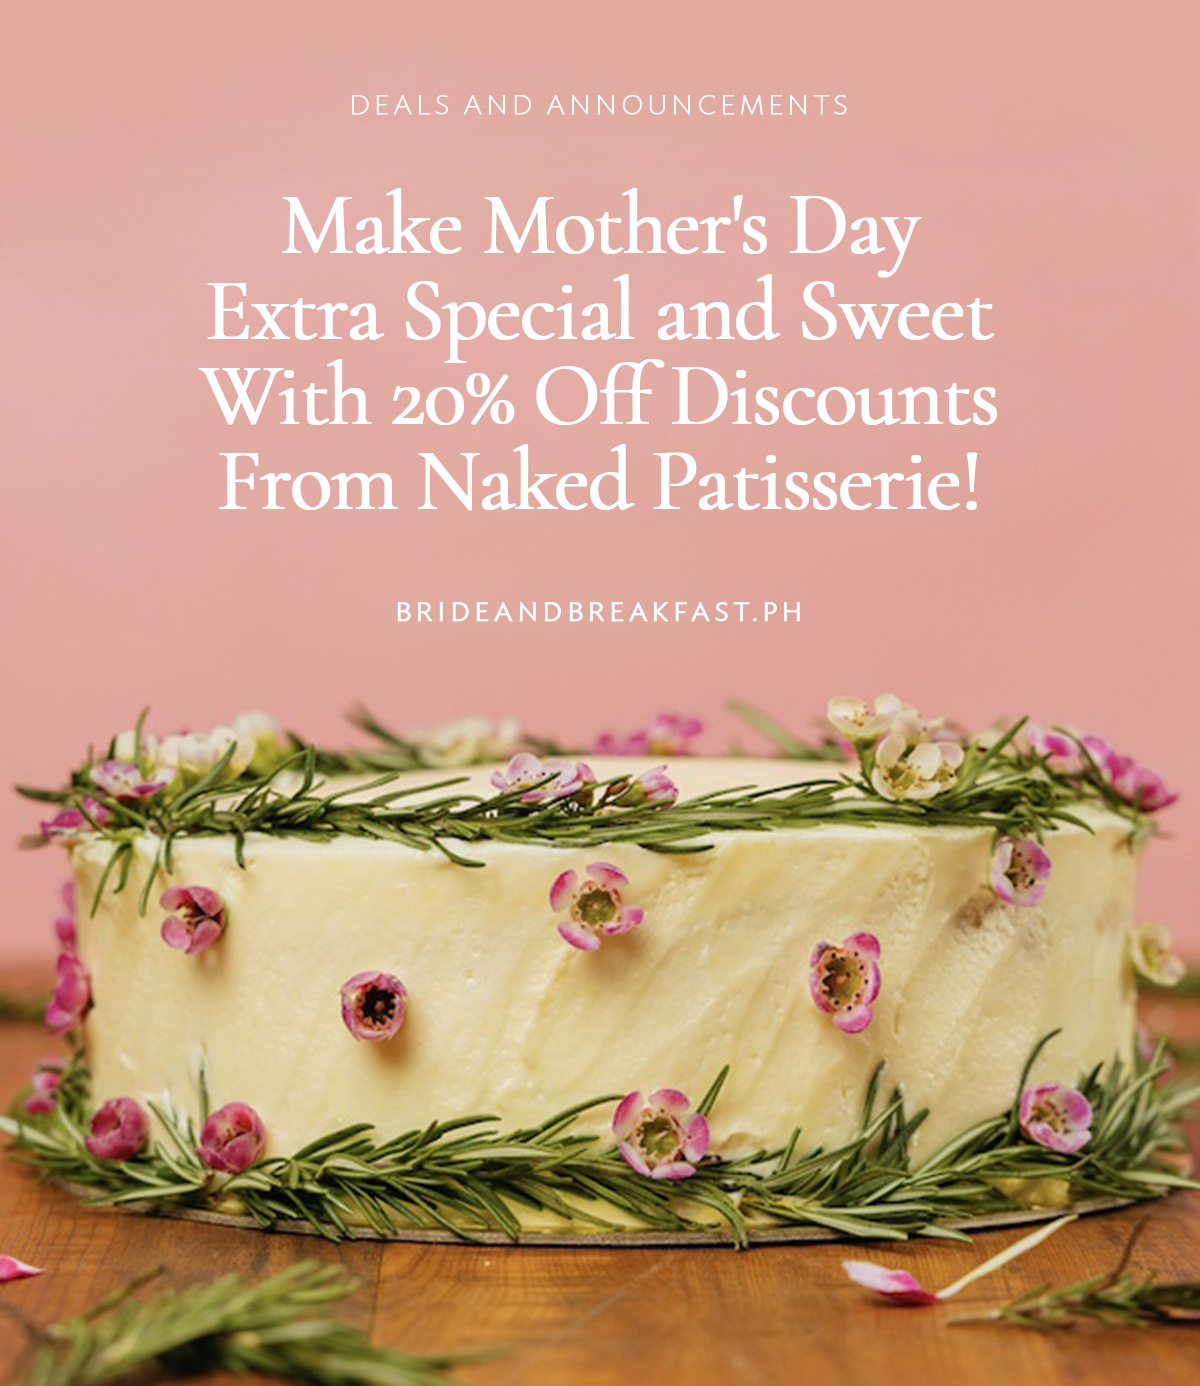 Make Mother's Day Extra Special and Sweet With 20% Off Discounts From Naked Patisserie!